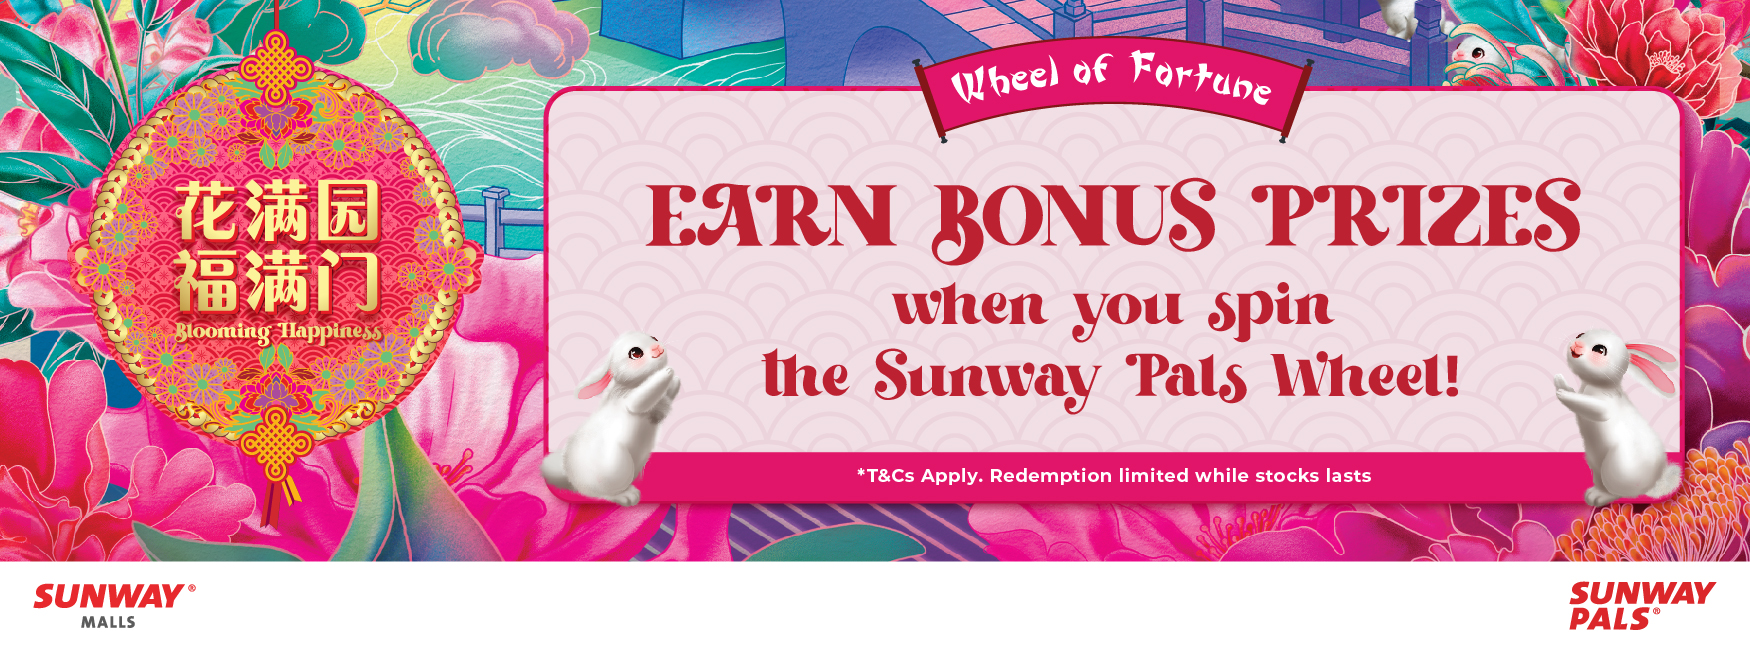 WHEEL OF FORTUNE - SUNWAY PALS